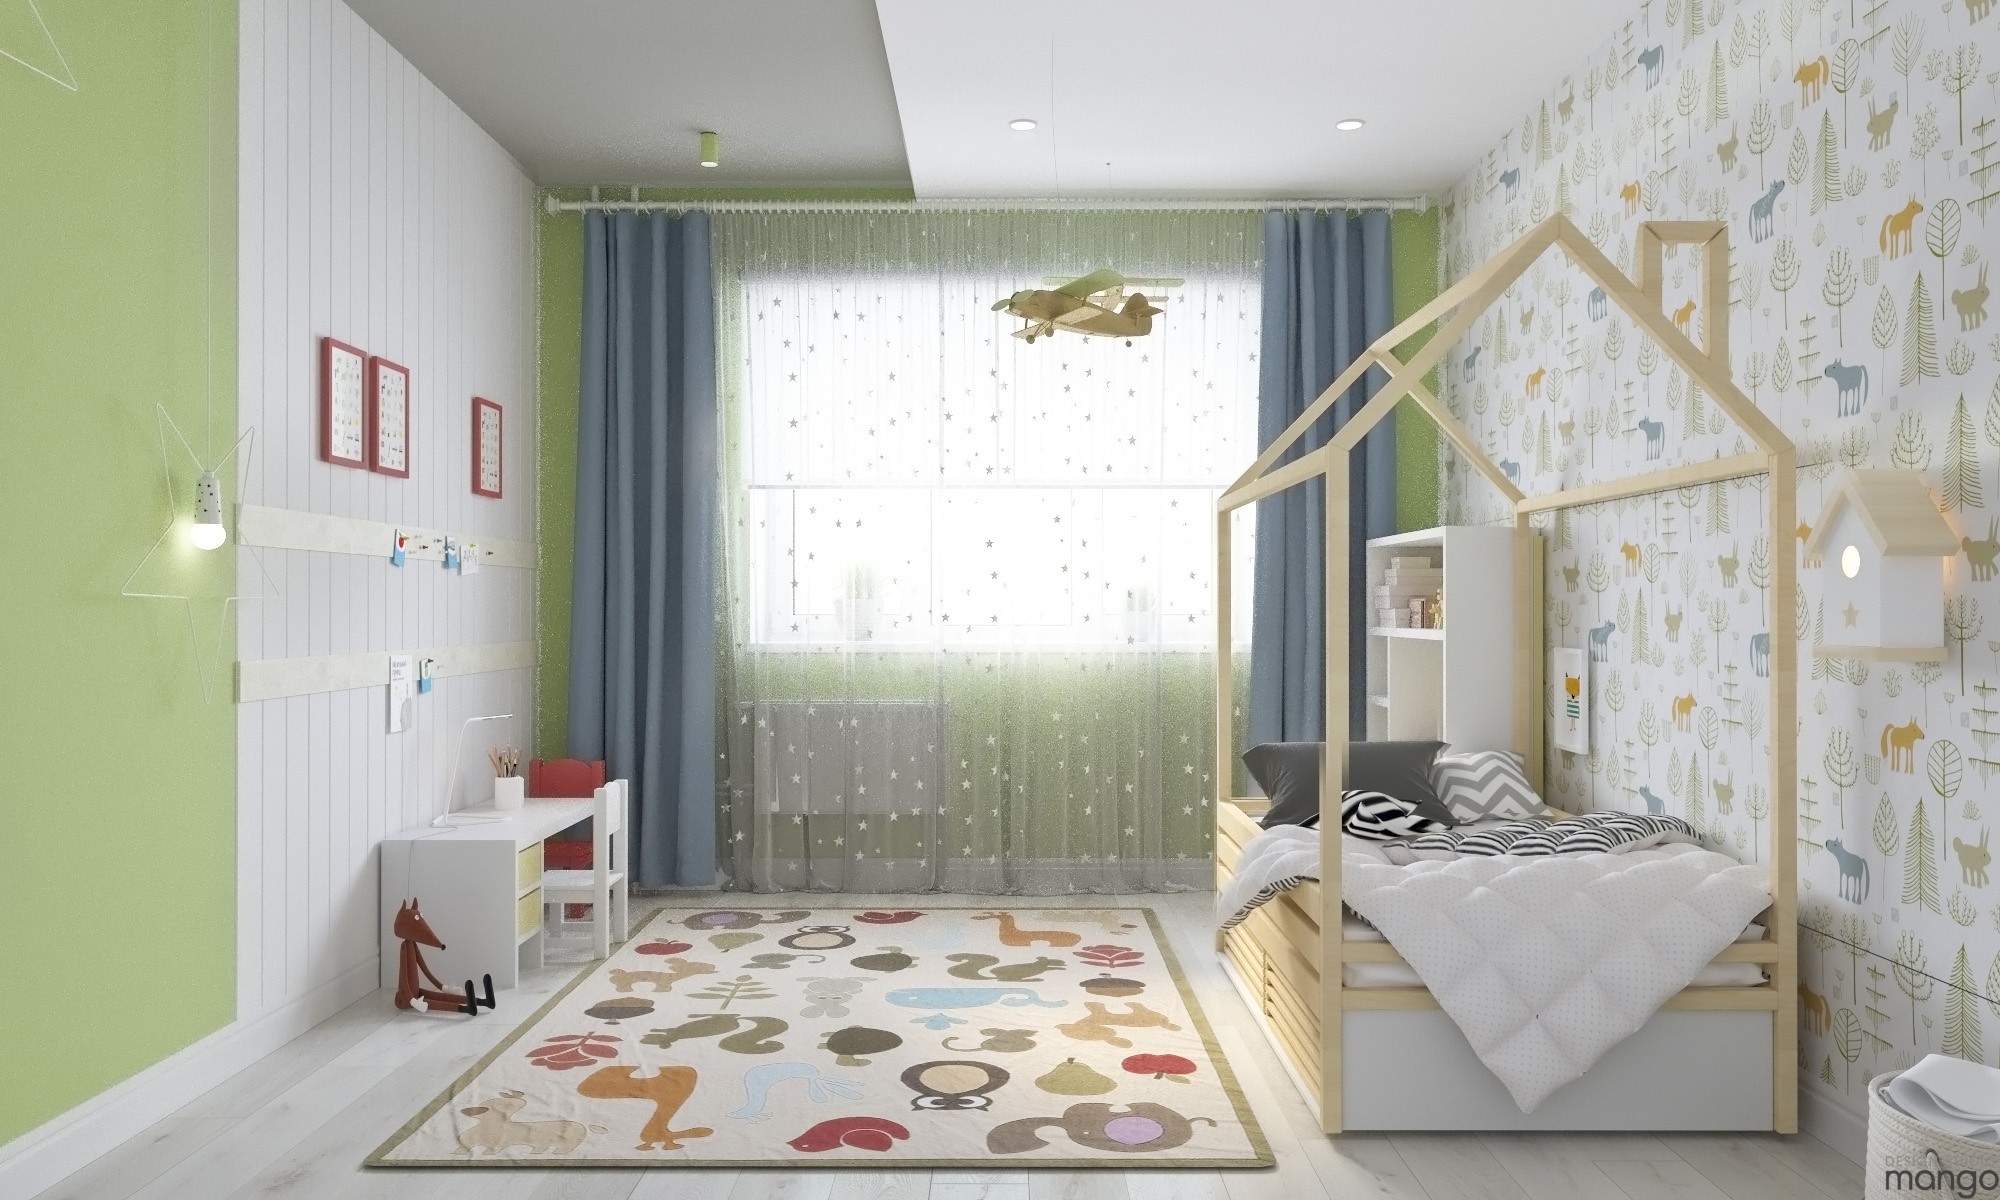 Ideas for colorful wallpapers "width =" 2000 "height =" 1200 "srcset =" https://mileray.com/wp-content/uploads/2020/05/1588509006_521_Colorful-Kids-Room-Designs-With-Adorable-Decor-In-It-That.jpg 2000w, https: // myfashionos .com / wp-content / uploads / 2016/10 / Design-Studio-Mango5-300x180.jpg 300w, https://mileray.com/wp-content/uploads/2016/10/Design-Studio-Mango5-768x461. jpg 768w, https://mileray.com/wp-content/uploads/2016/10/Design-Studio-Mango5-1024x614.jpg 1024w, https://mileray.com/wp-content/uploads/2016/10/ Design-Studio-Mango5-696x418.jpg 696w, https://mileray.com/wp-content/uploads/2016/10/Design-Studio-Mango5-1068x641.jpg 1068w, https://mileray.com/wp- Content / Uploads / 2016/10 / Design-Studio-Mango5-700x420.jpg 700w "sizes =" (maximum width: 2000px) 100vw, 2000px